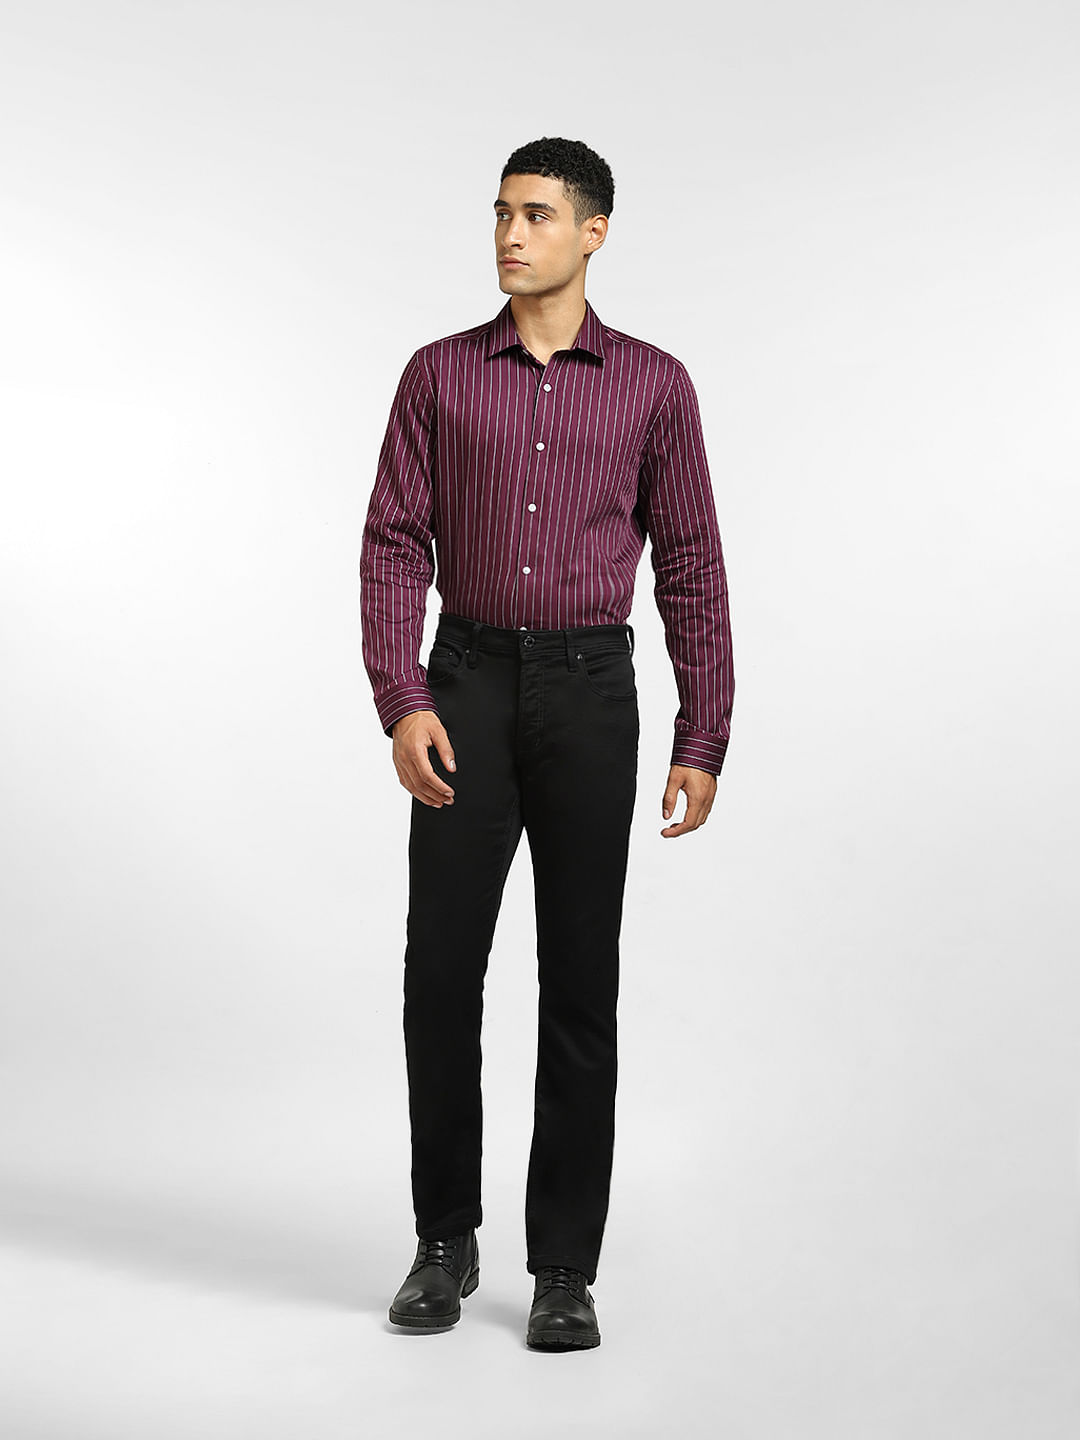 Buy BOSS Stretchable Jersey SlimFit Shirt  603 Color Men  AJIO LUXE